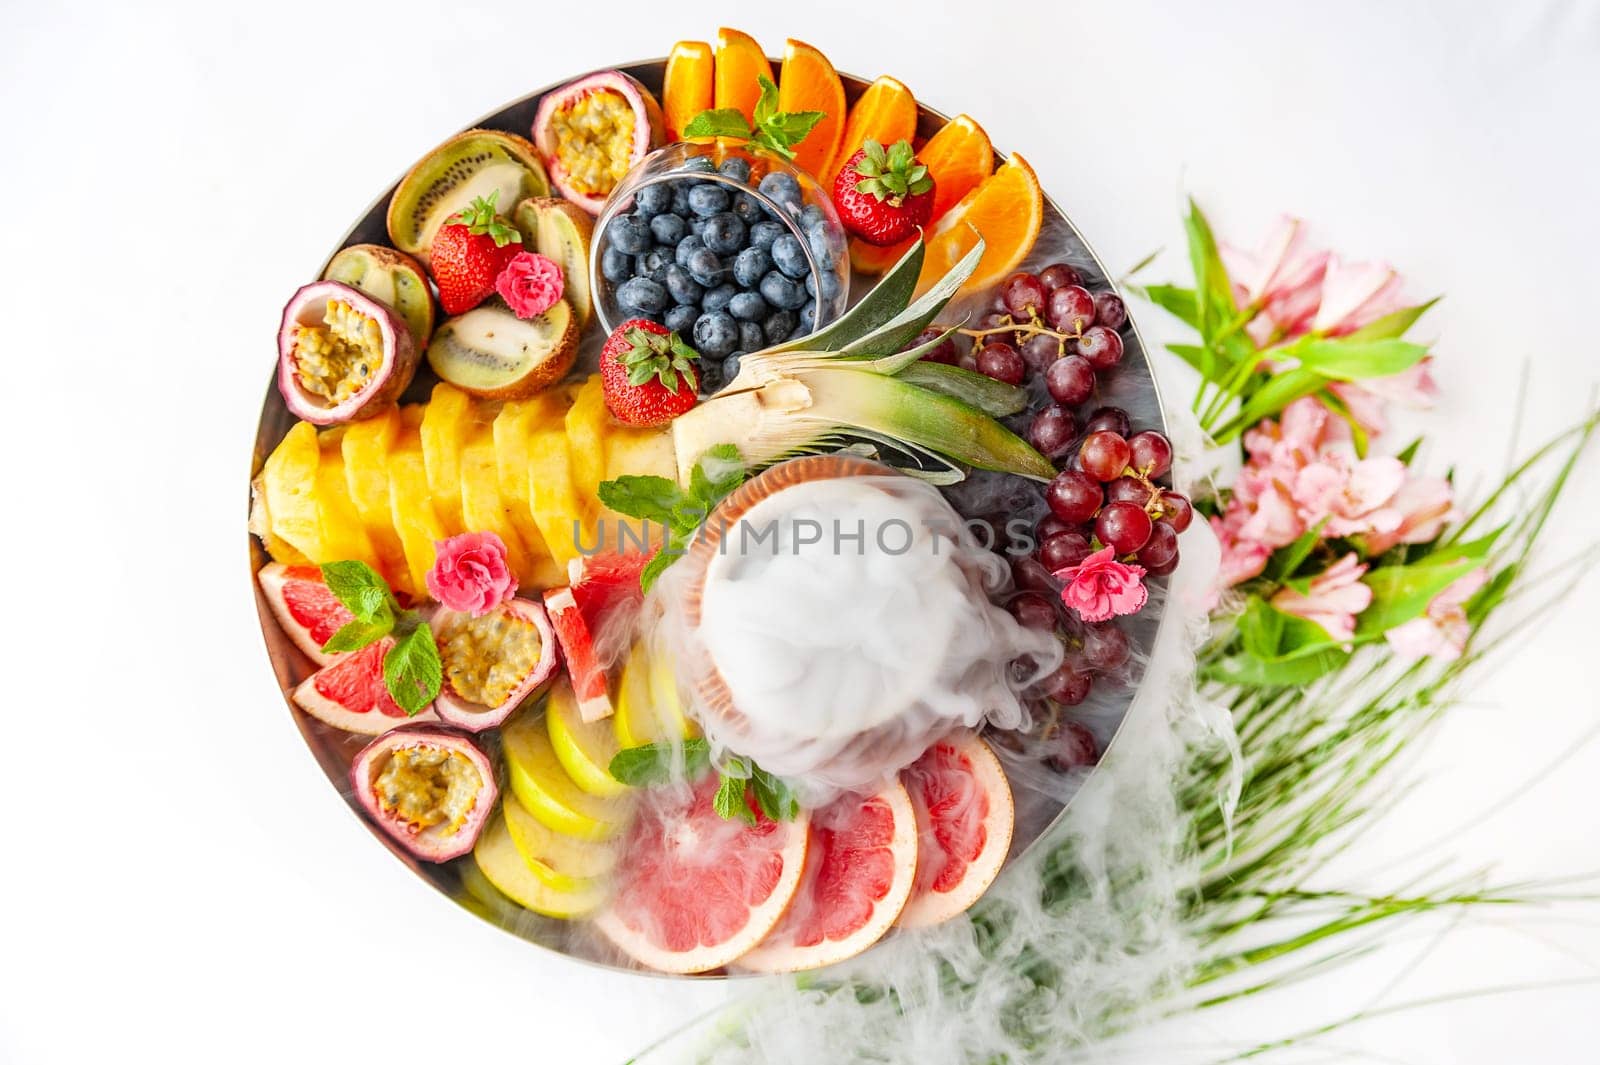 Raw fruits and berries assortment platter on the plate, on the white table